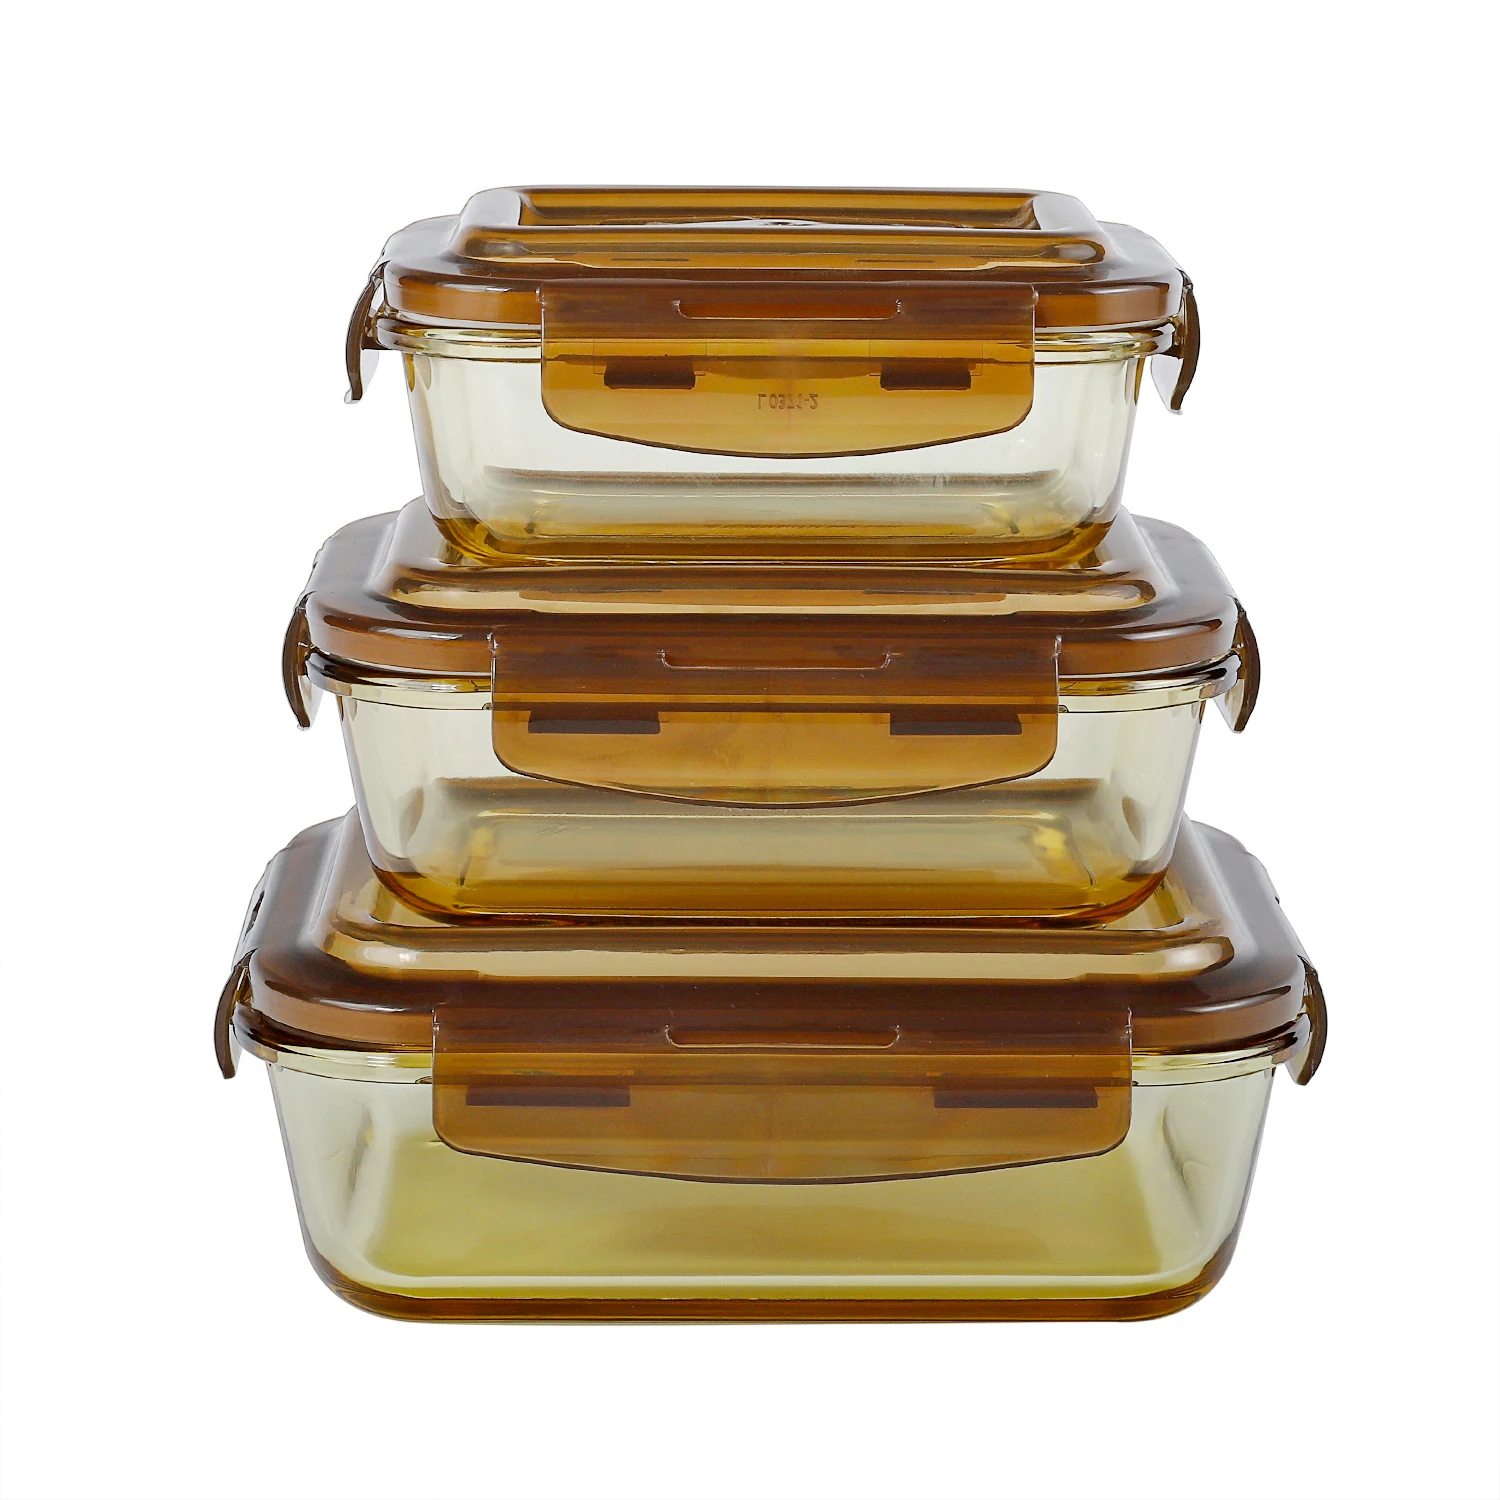 

New Design School Lunch Box High Quality Containers Glass Container Food Storage Boxes & Bins Eco-friendly Multifunction Modern